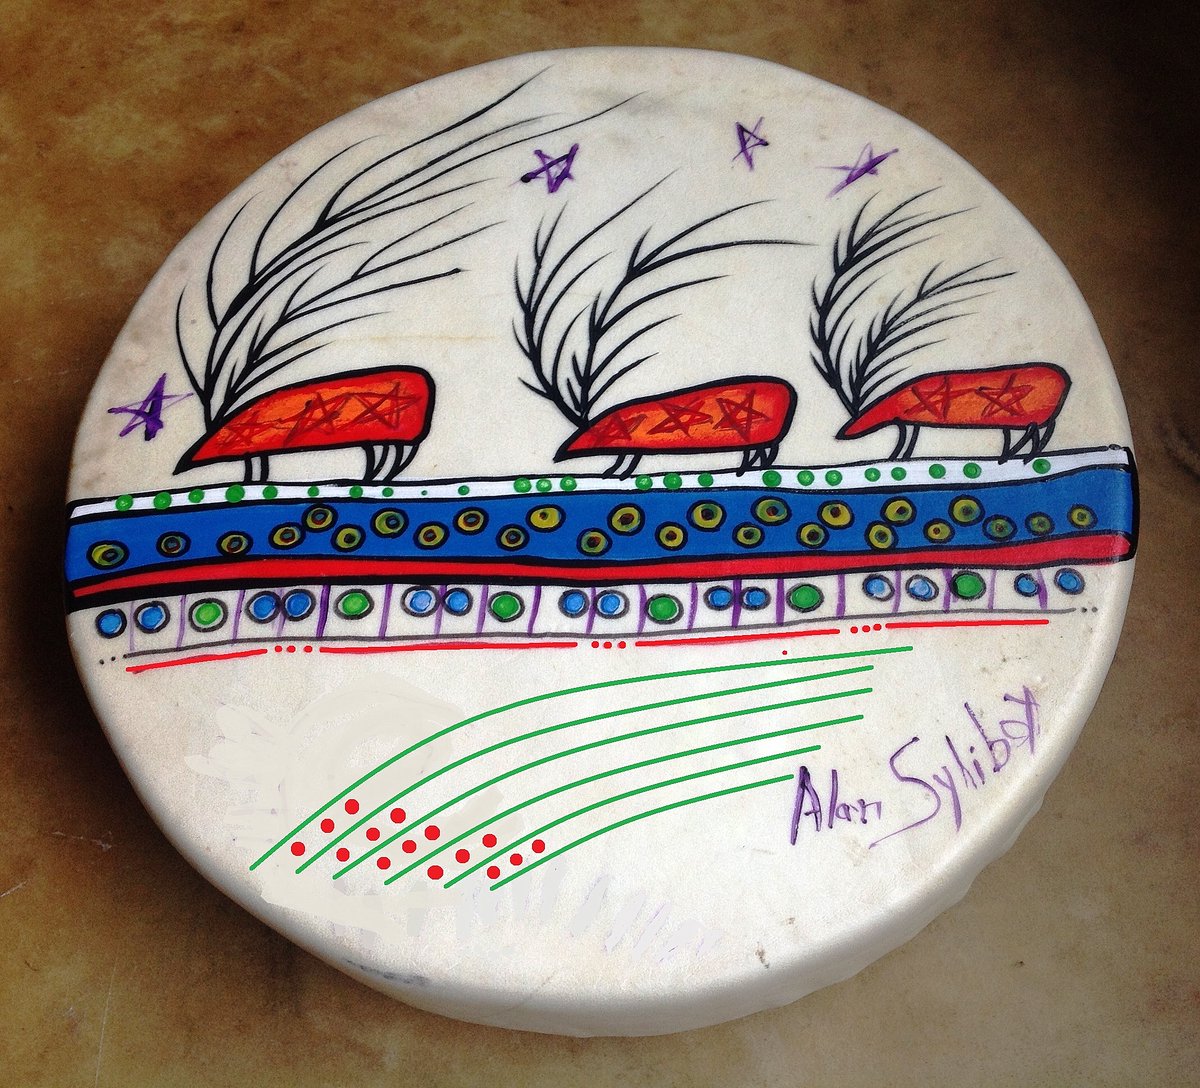 The Daily Drum
Todays I am featuring a “Three Caribou Drum”.
Have a Great Day!